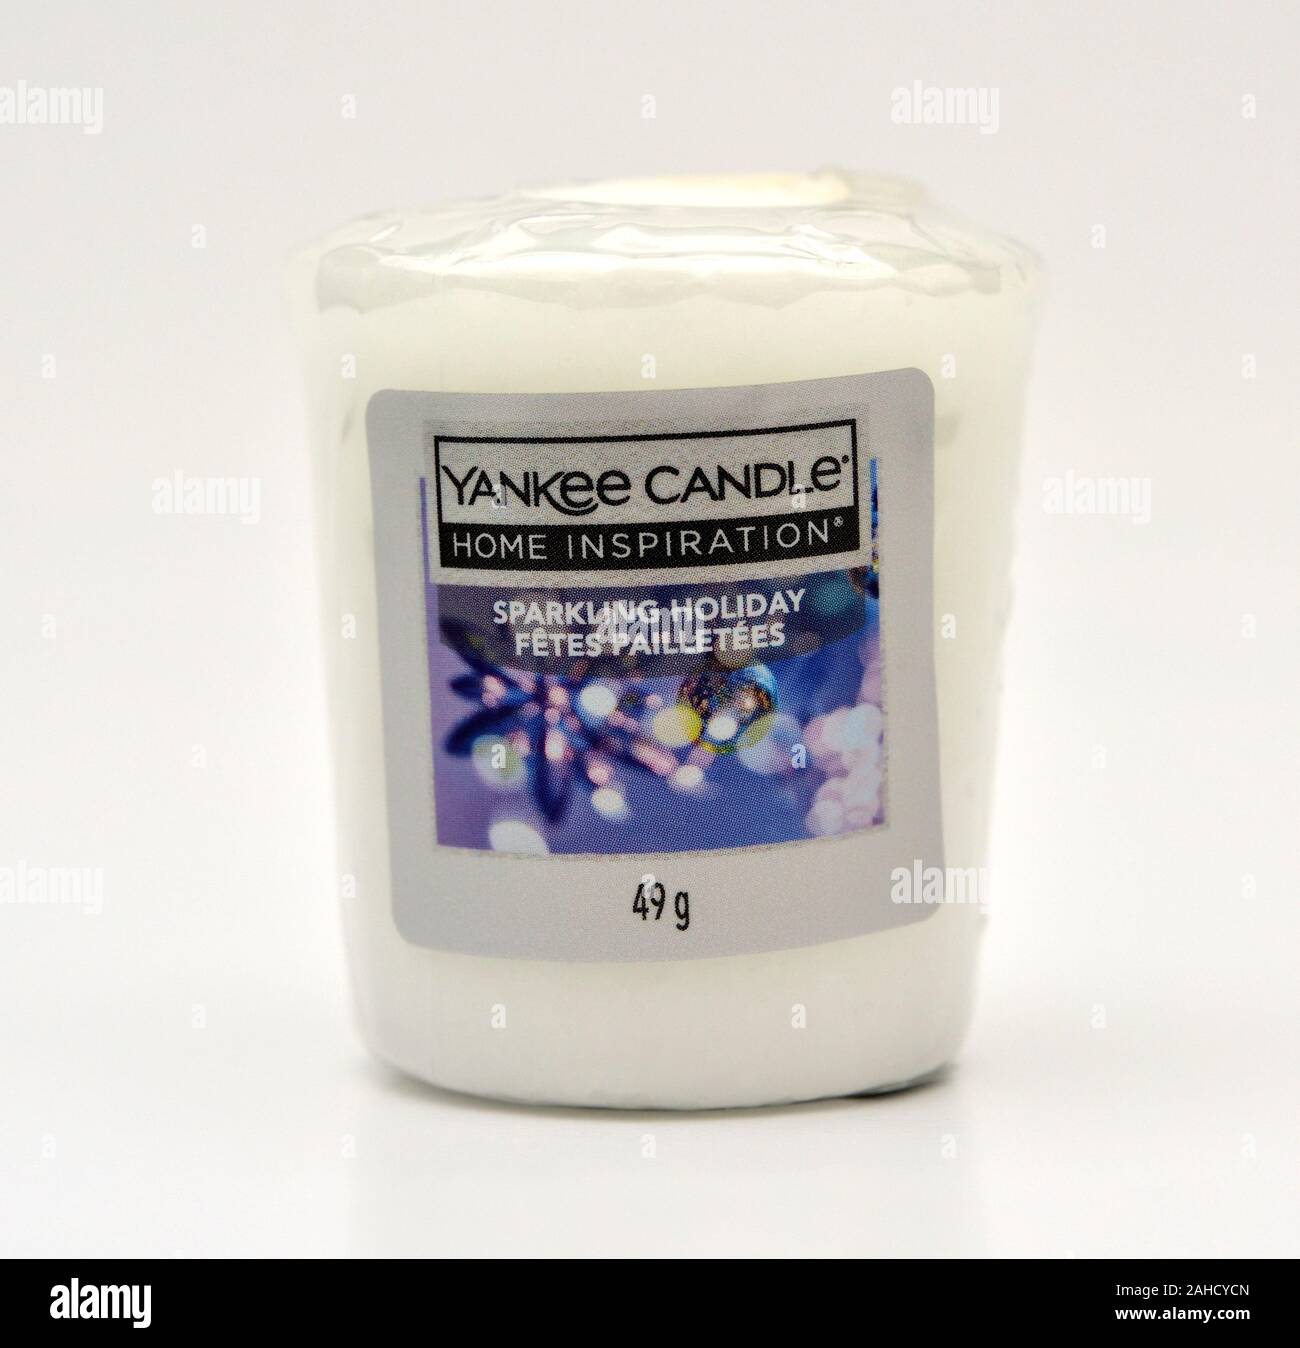 Yankee candle Sparkling holiday Stock Photo